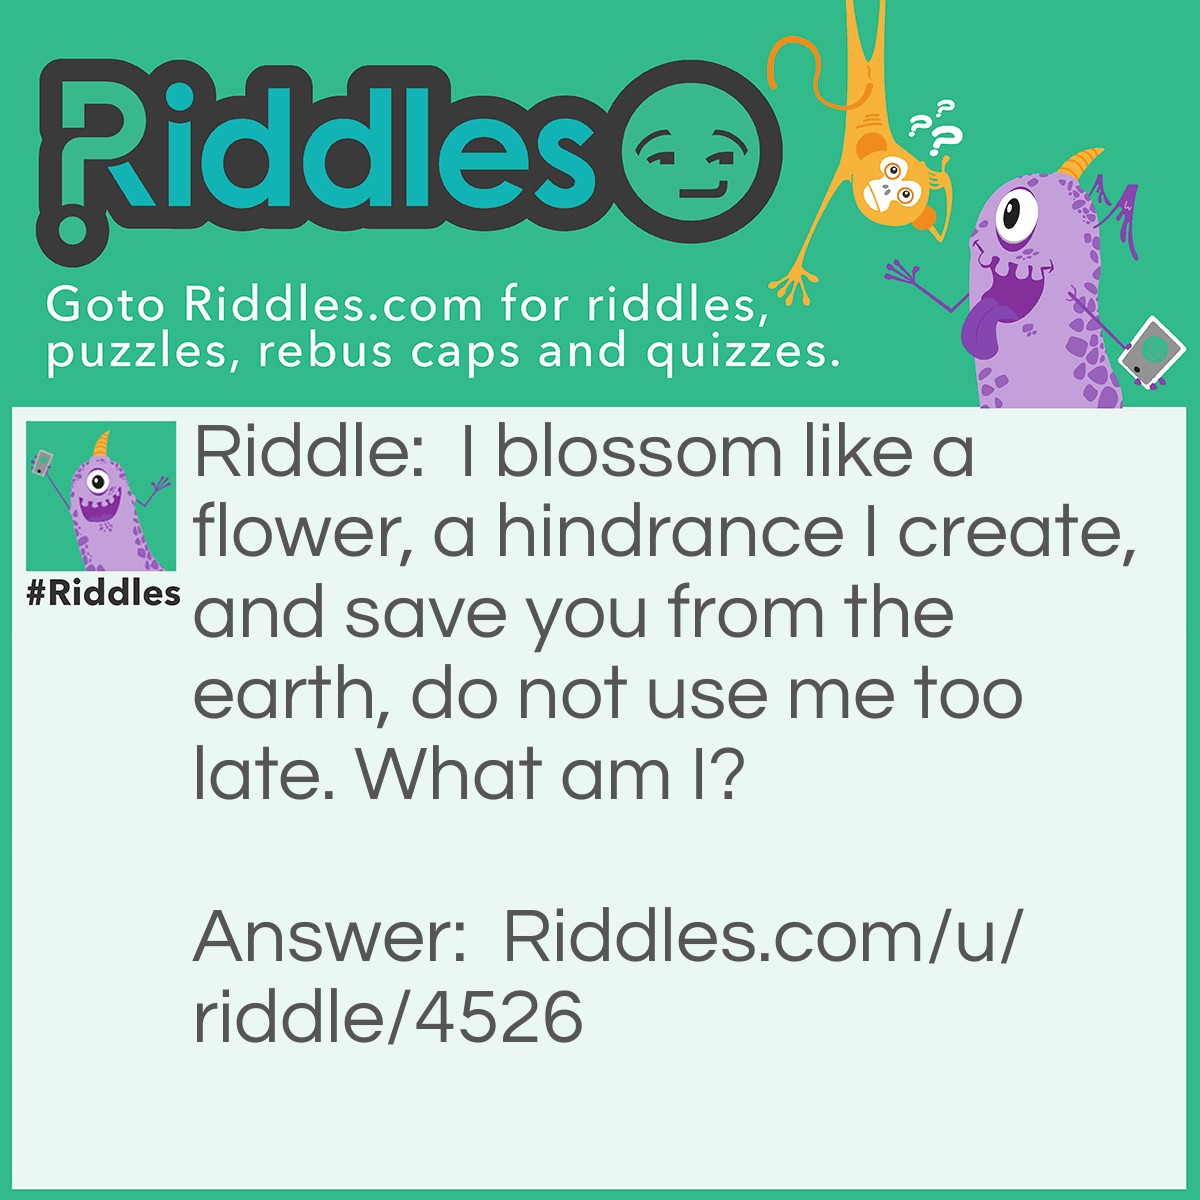 Riddle: I blossom like a flower, a hindrance I create, and save you from the earth, do not use me too late. What am I? Answer: A Parachute.